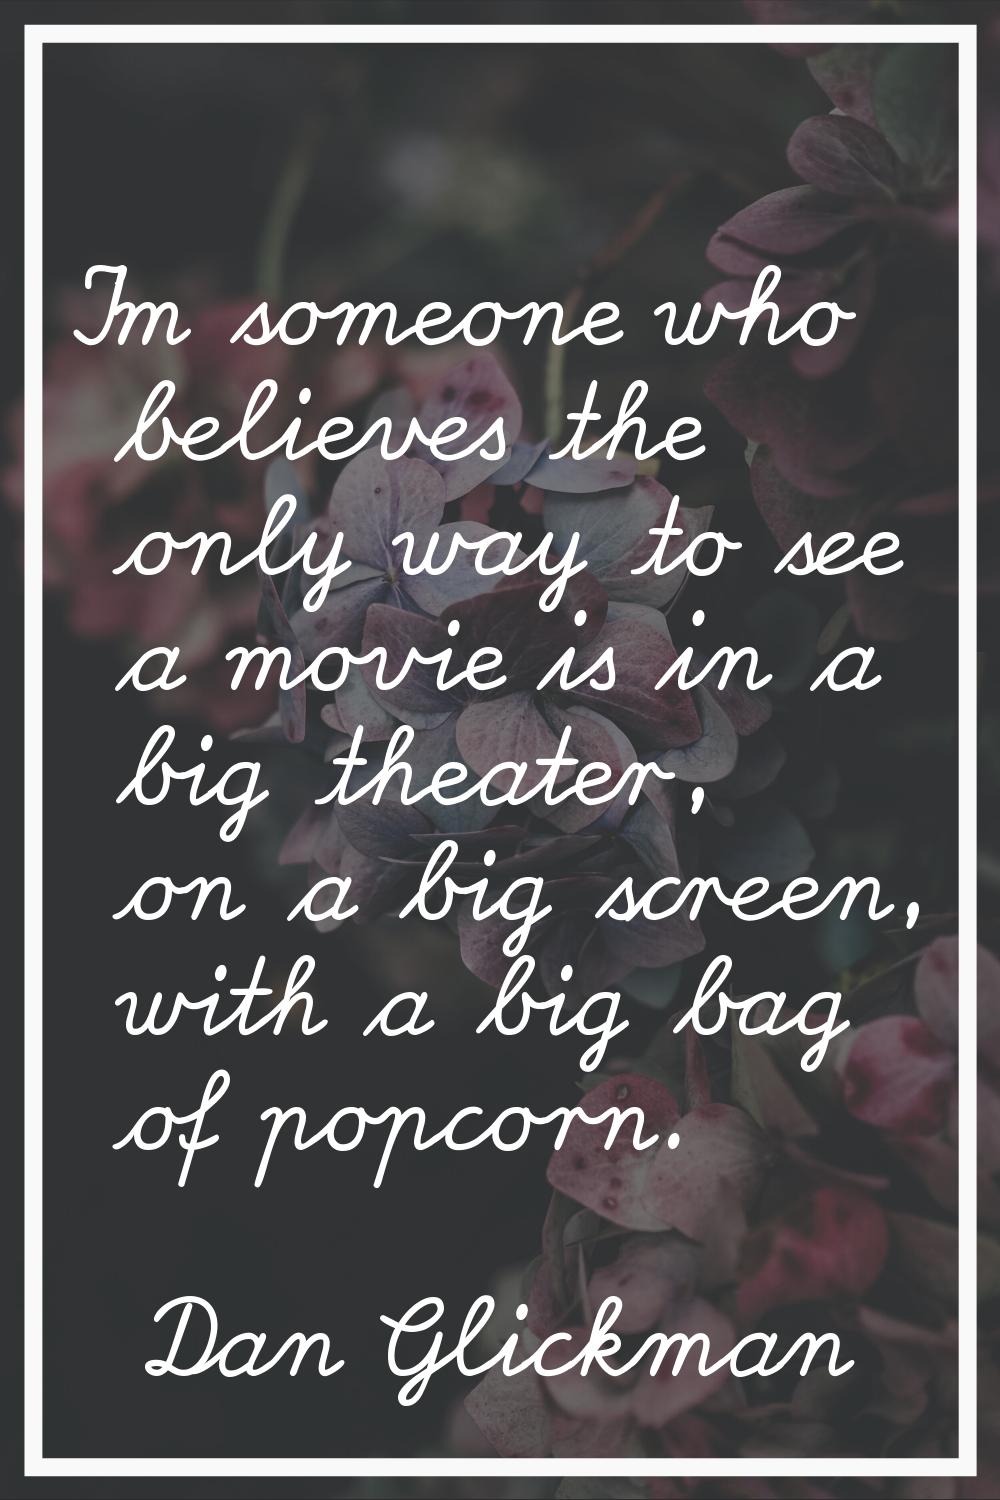 I'm someone who believes the only way to see a movie is in a big theater, on a big screen, with a b